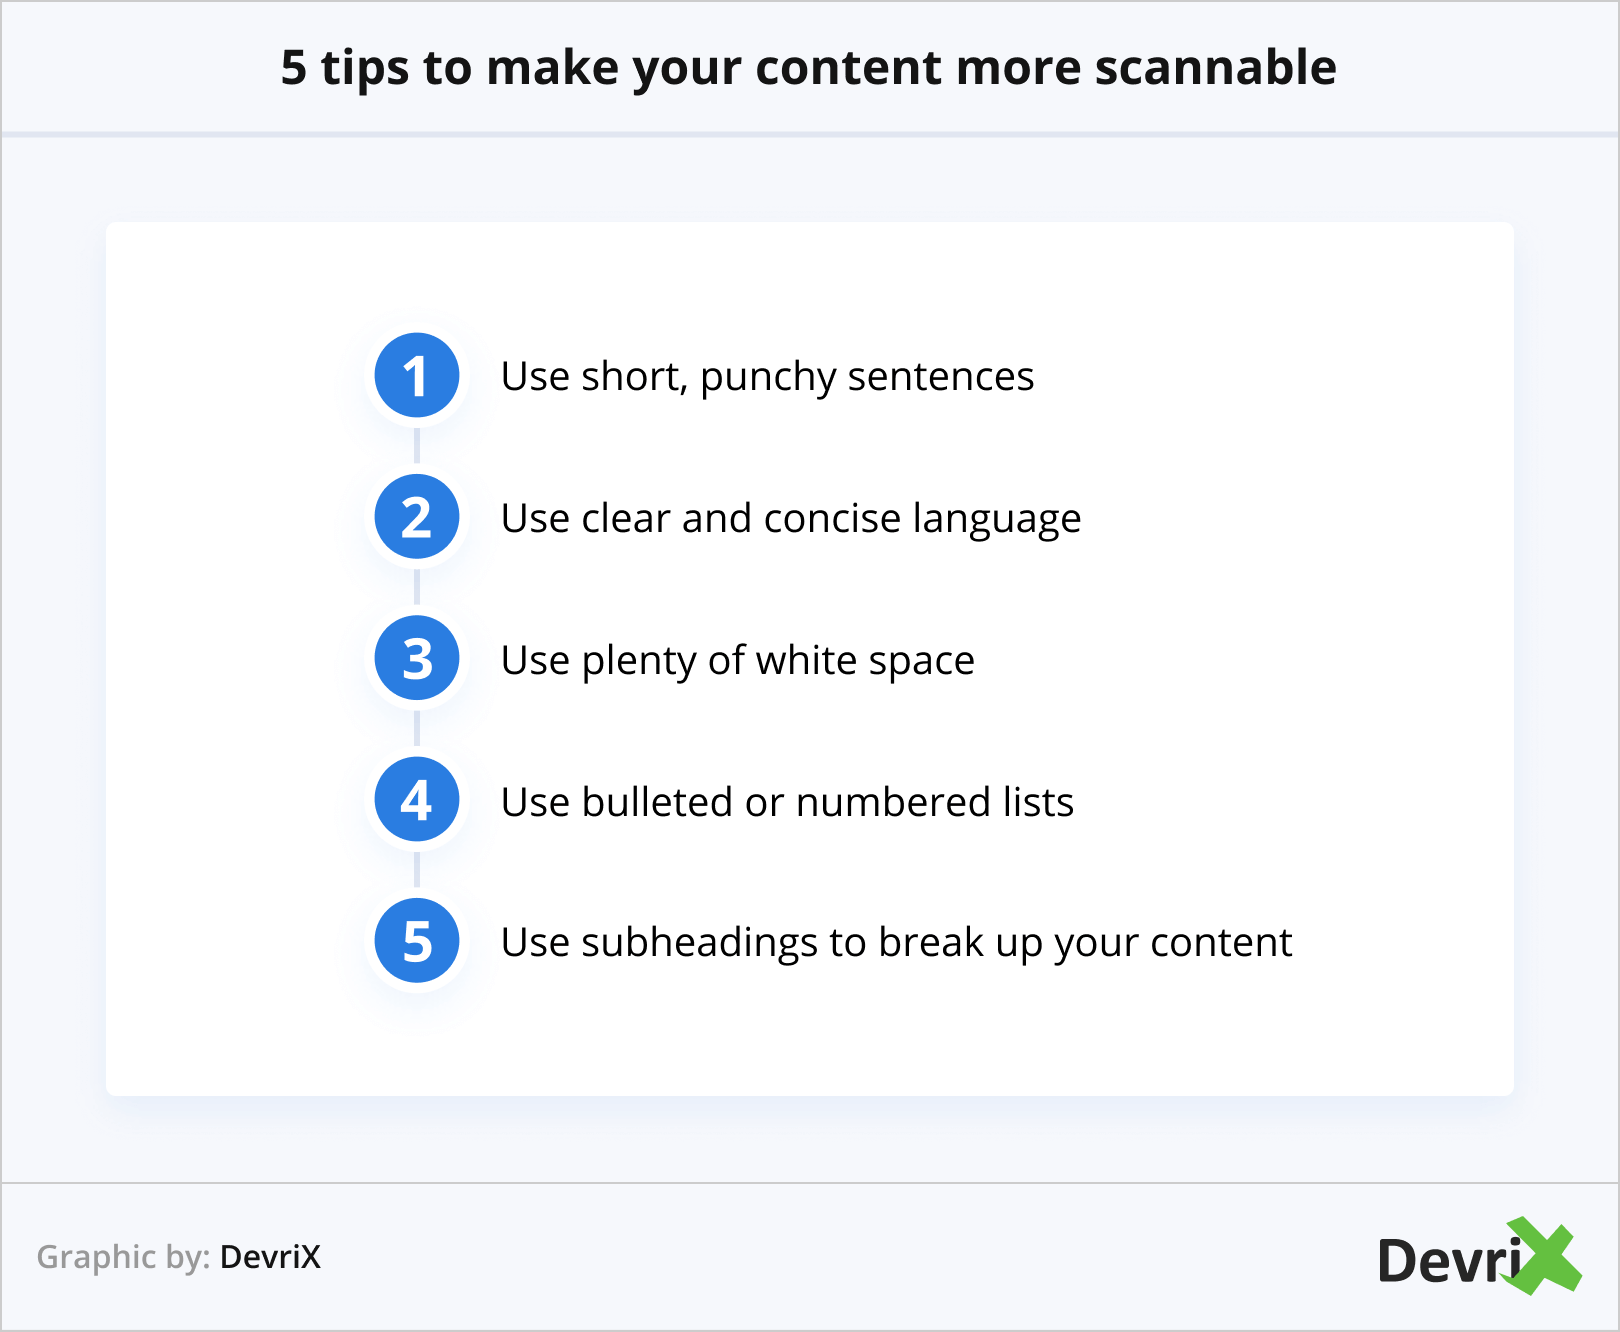 5 tips to make your content more scannable